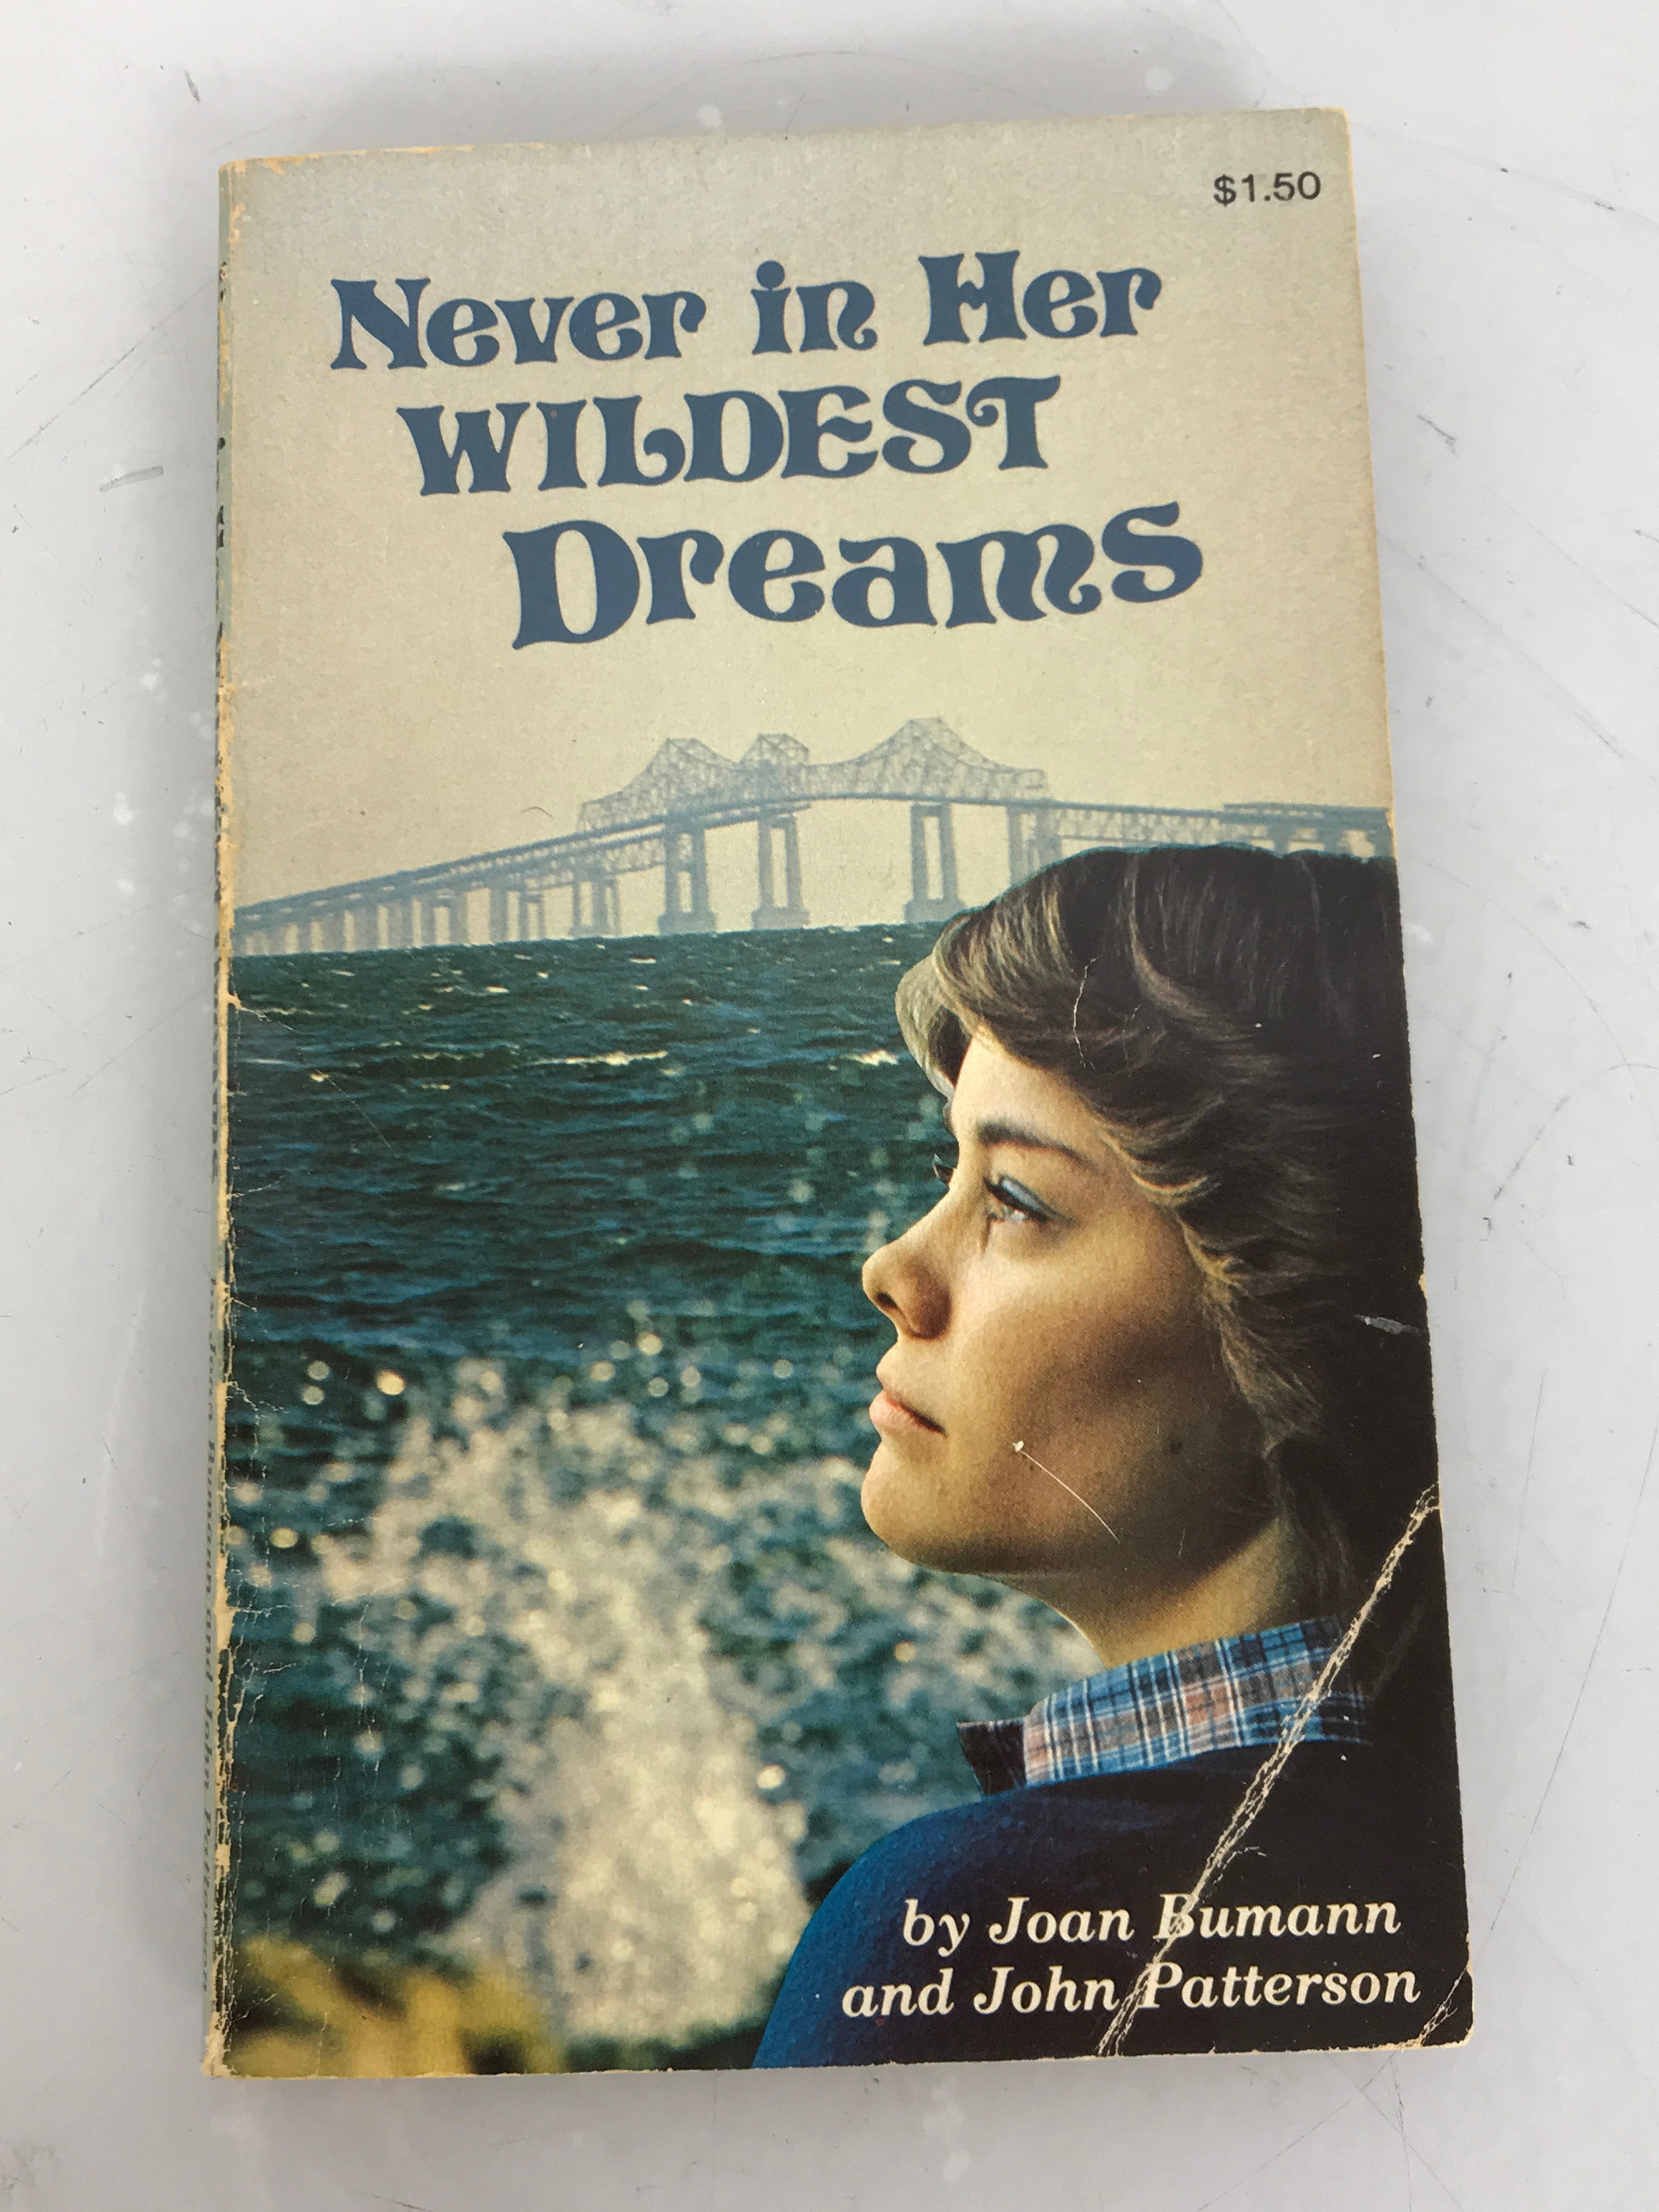 Never in Her Wildest Dreams by Joan Bumann and John Patterson 1981 SC